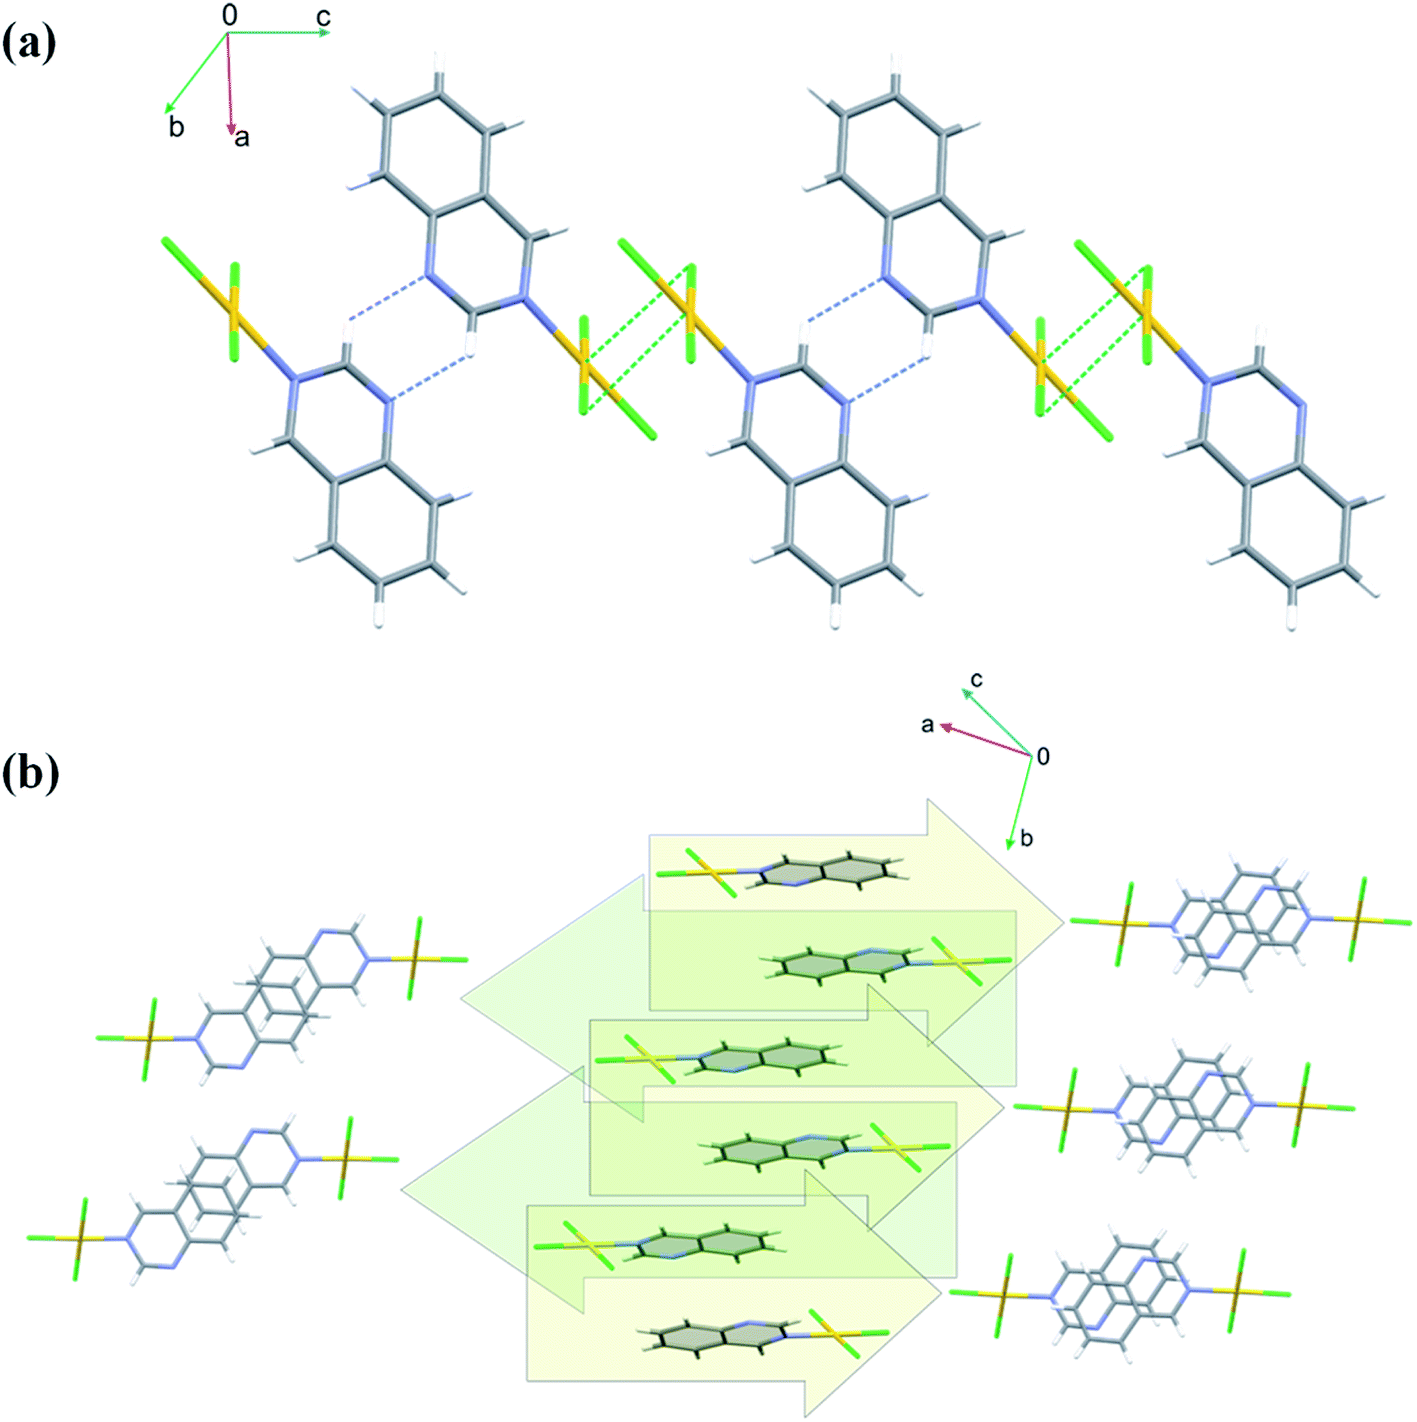 Mononuclear Gold Iii Complexes With Diazanaphthalenes The Influence Of The Position Of Nitrogen Atoms In The Aromatic Rings On The Complex Crystalline Properties Rsc Advances Rsc Publishing